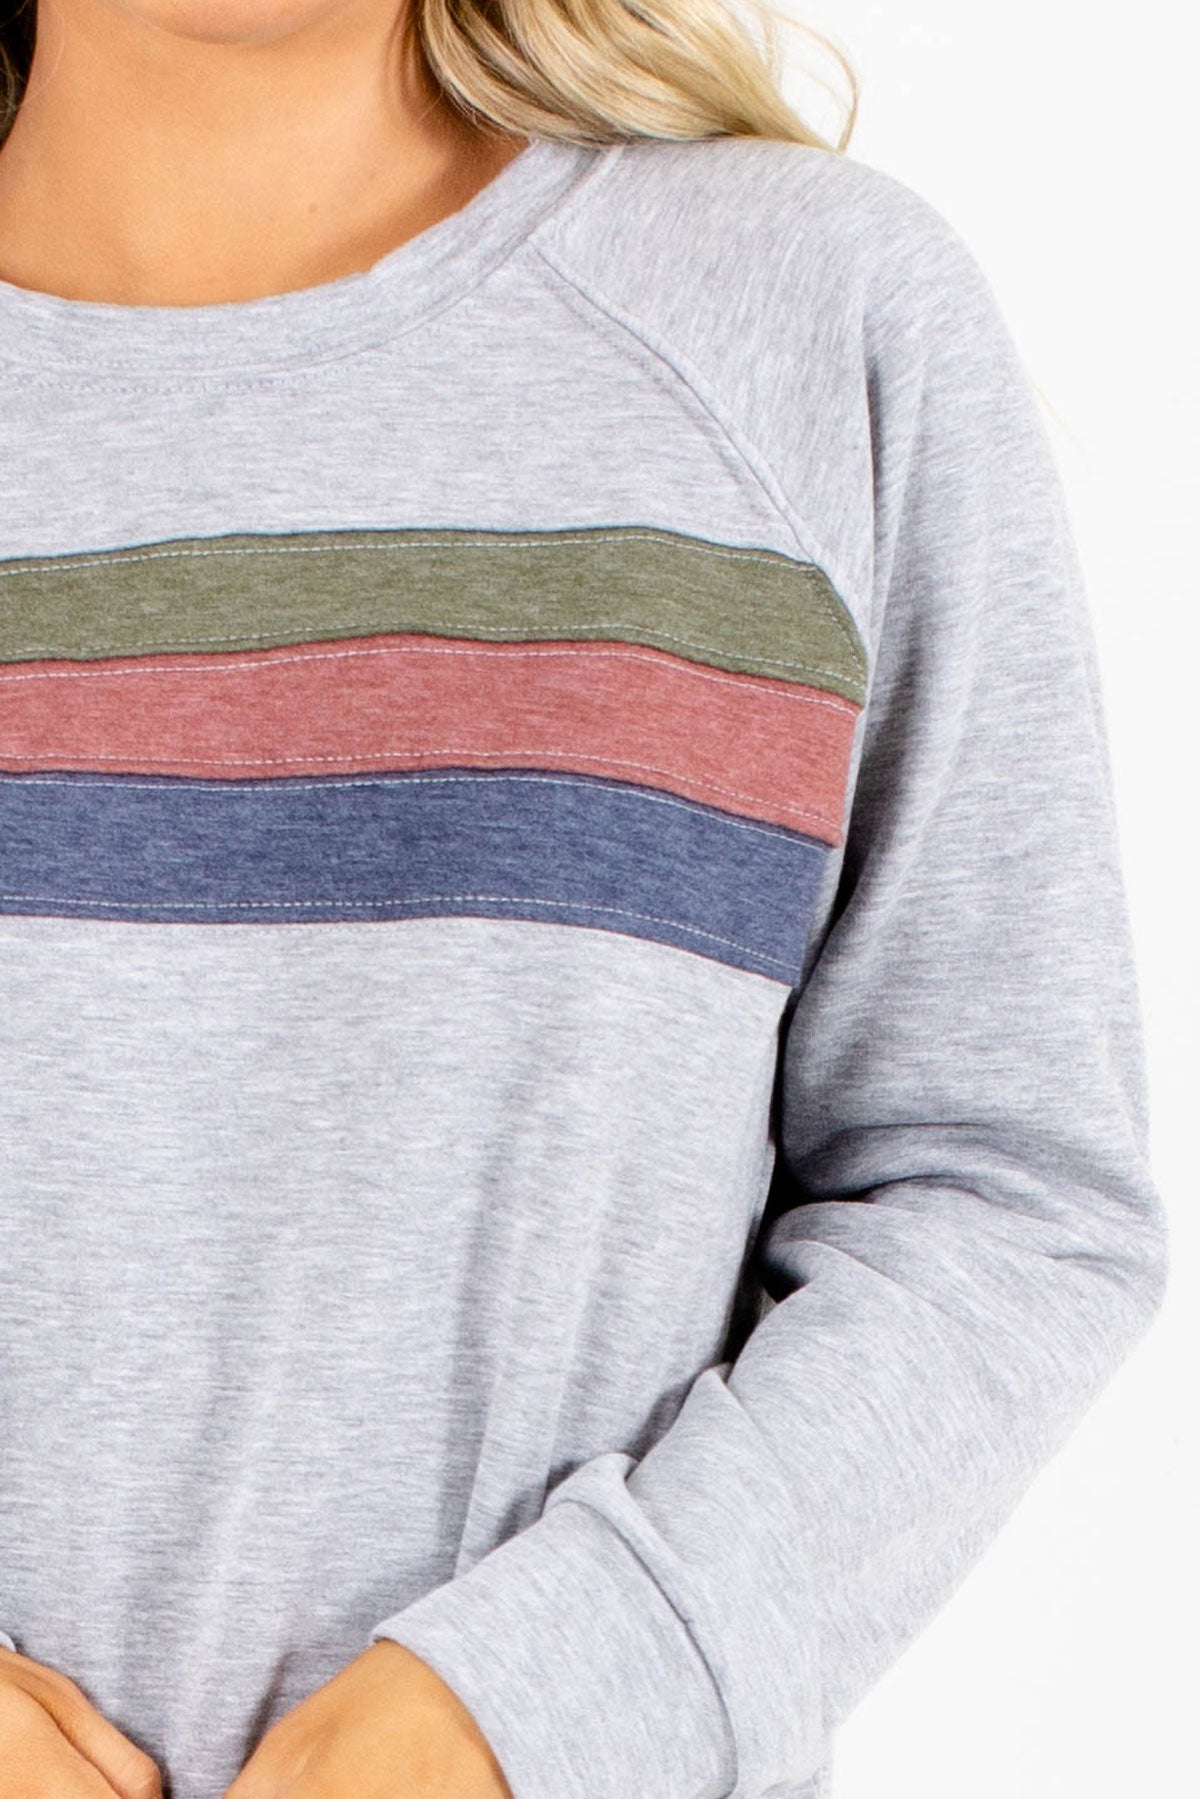 Striped Boutique Sweater For Women